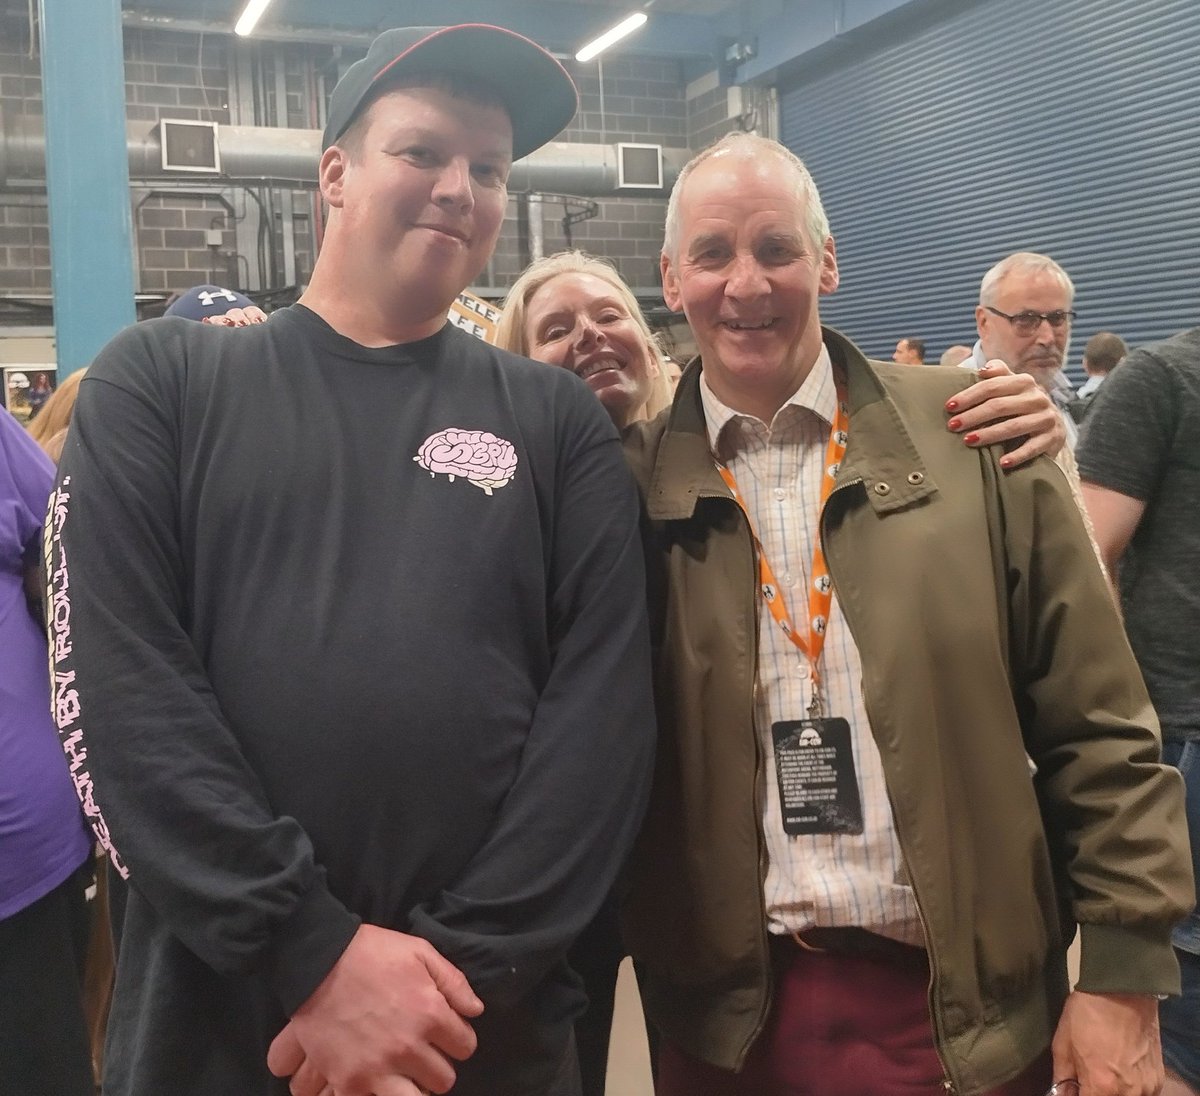 Was a great time at EM-Con 2023 meeting Hugo Myatt, Julian Glover and Chris Barrie (even got photo bomb from Chloë Annet 😂) #EmCon #Knightmare #IndianaJones #RedDwarf